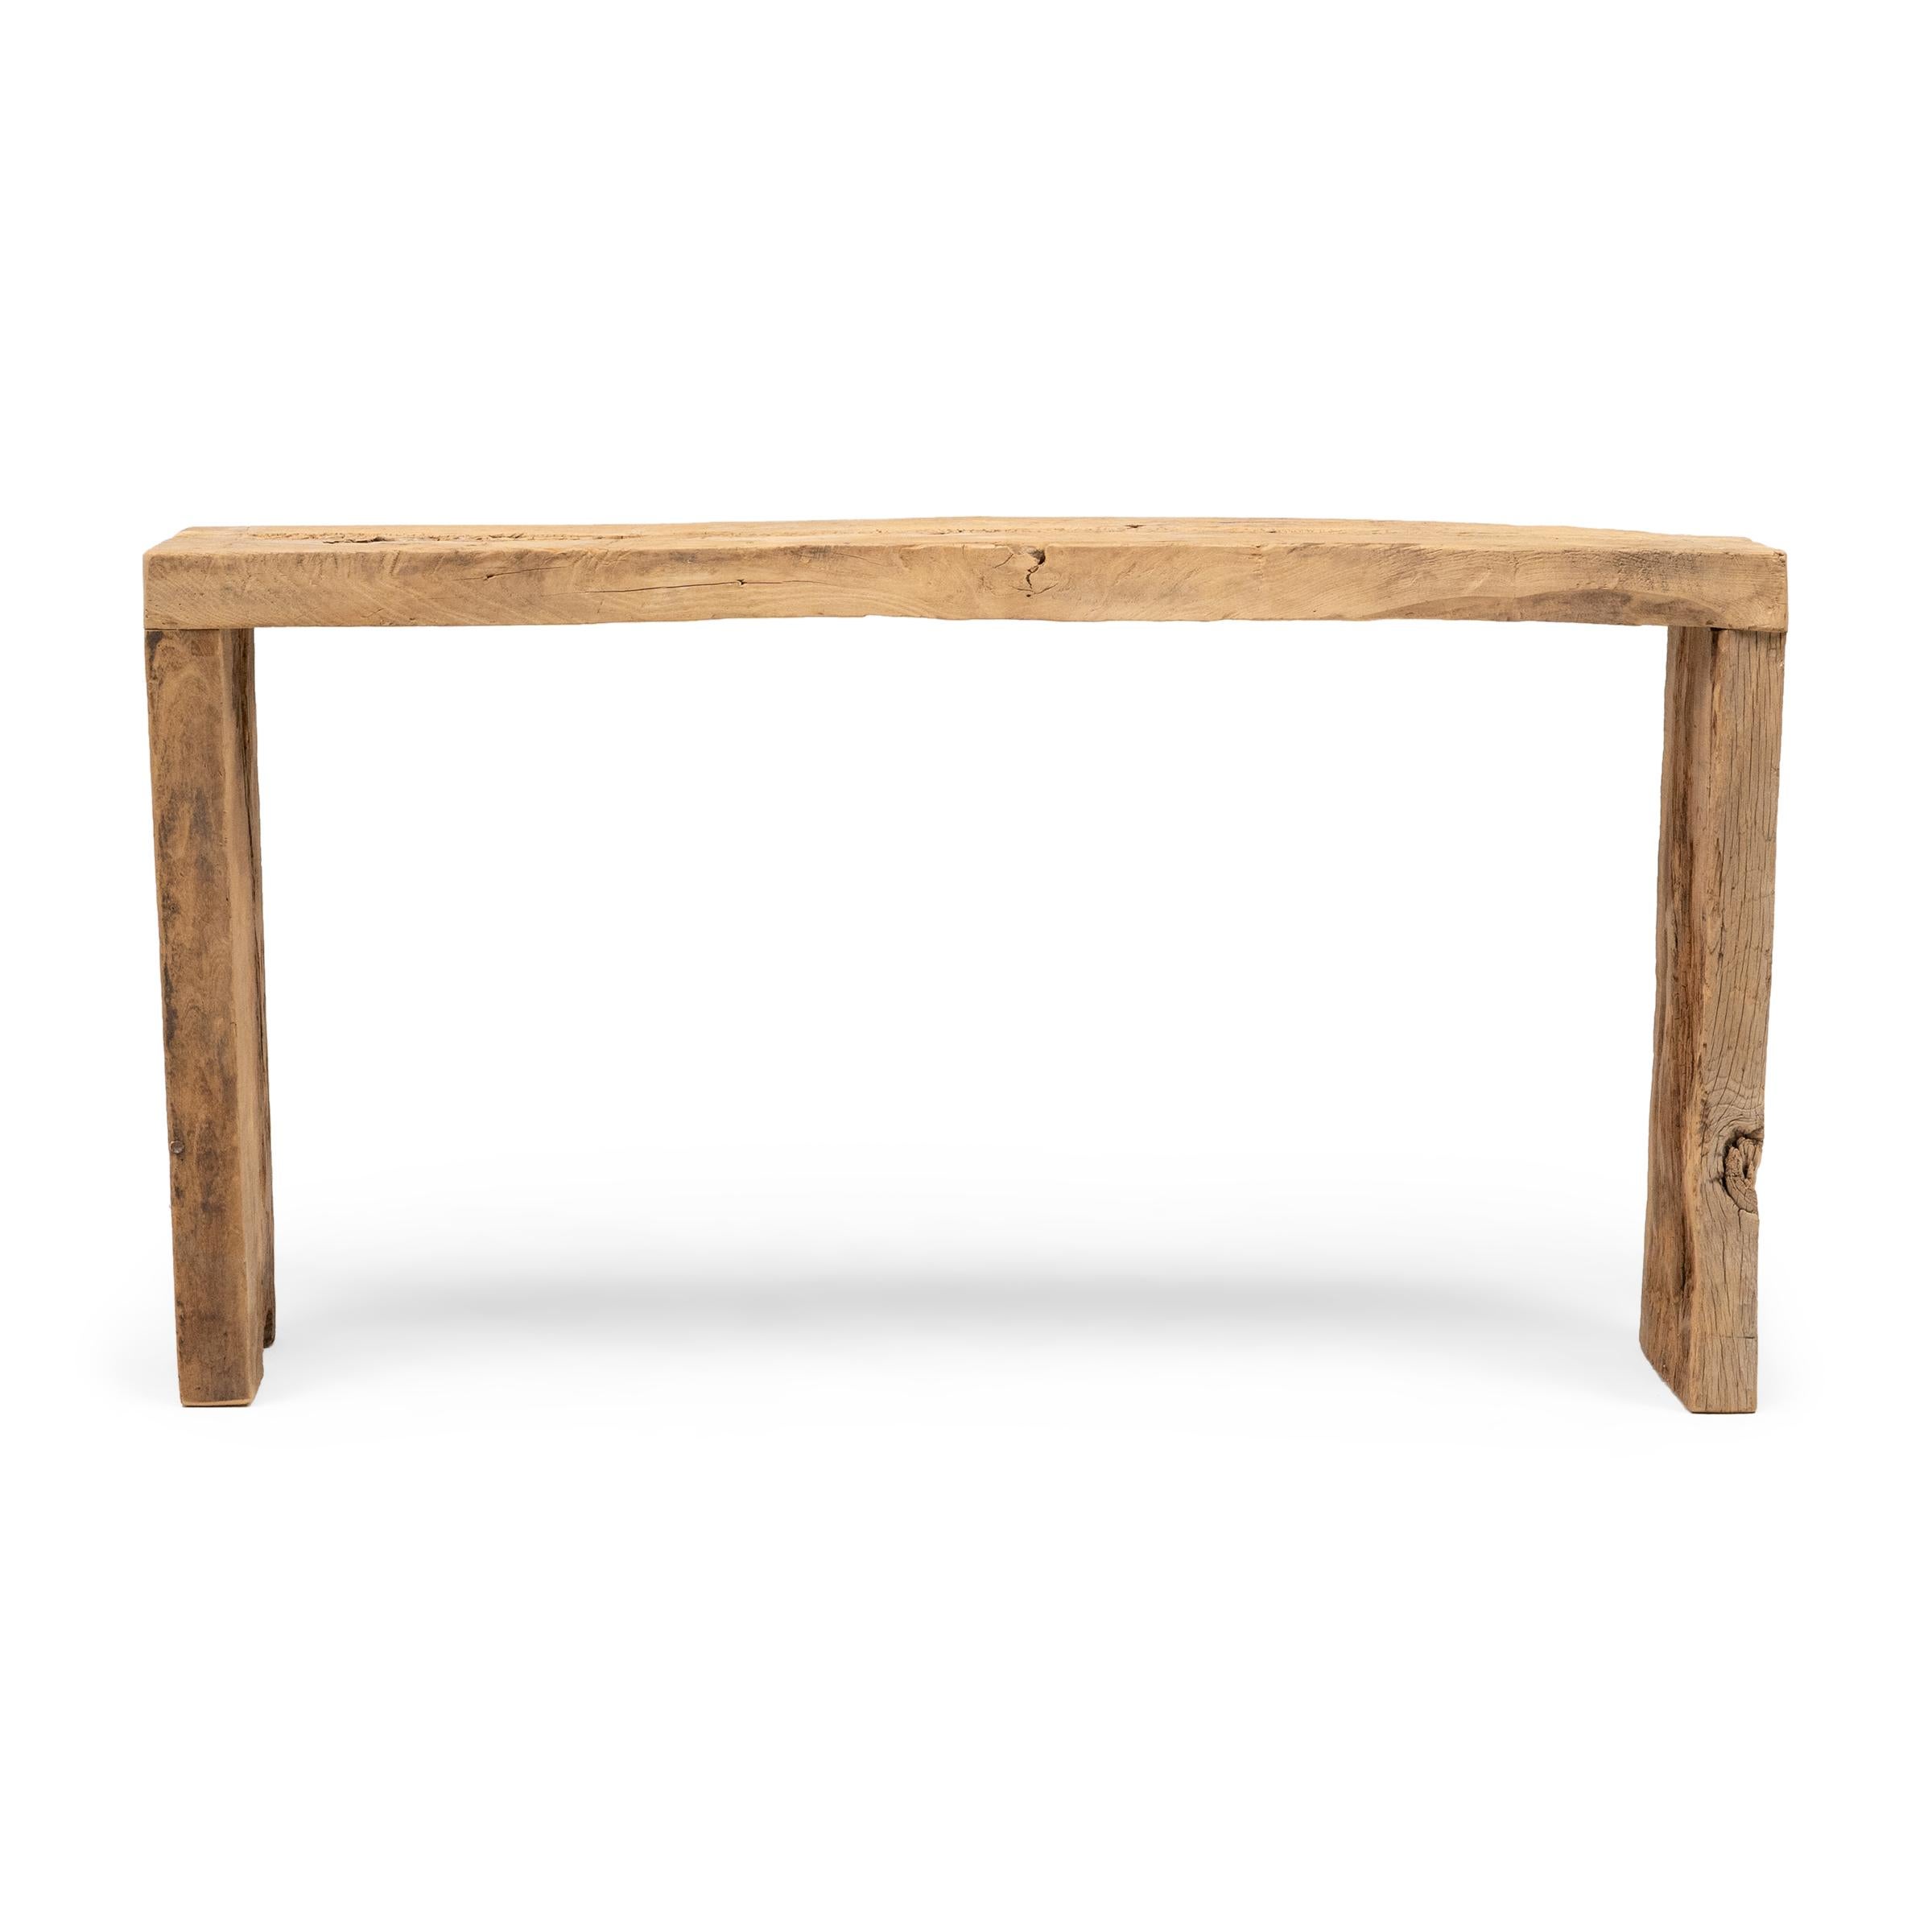 This contemporary console table is a celebration of wabi-sabi style. Crafted of wood reclaimed from Qing-dynasty architecture, the table has a minimalist waterfall design with dovetailed corners that recreate traditional joinery methods. The rustic